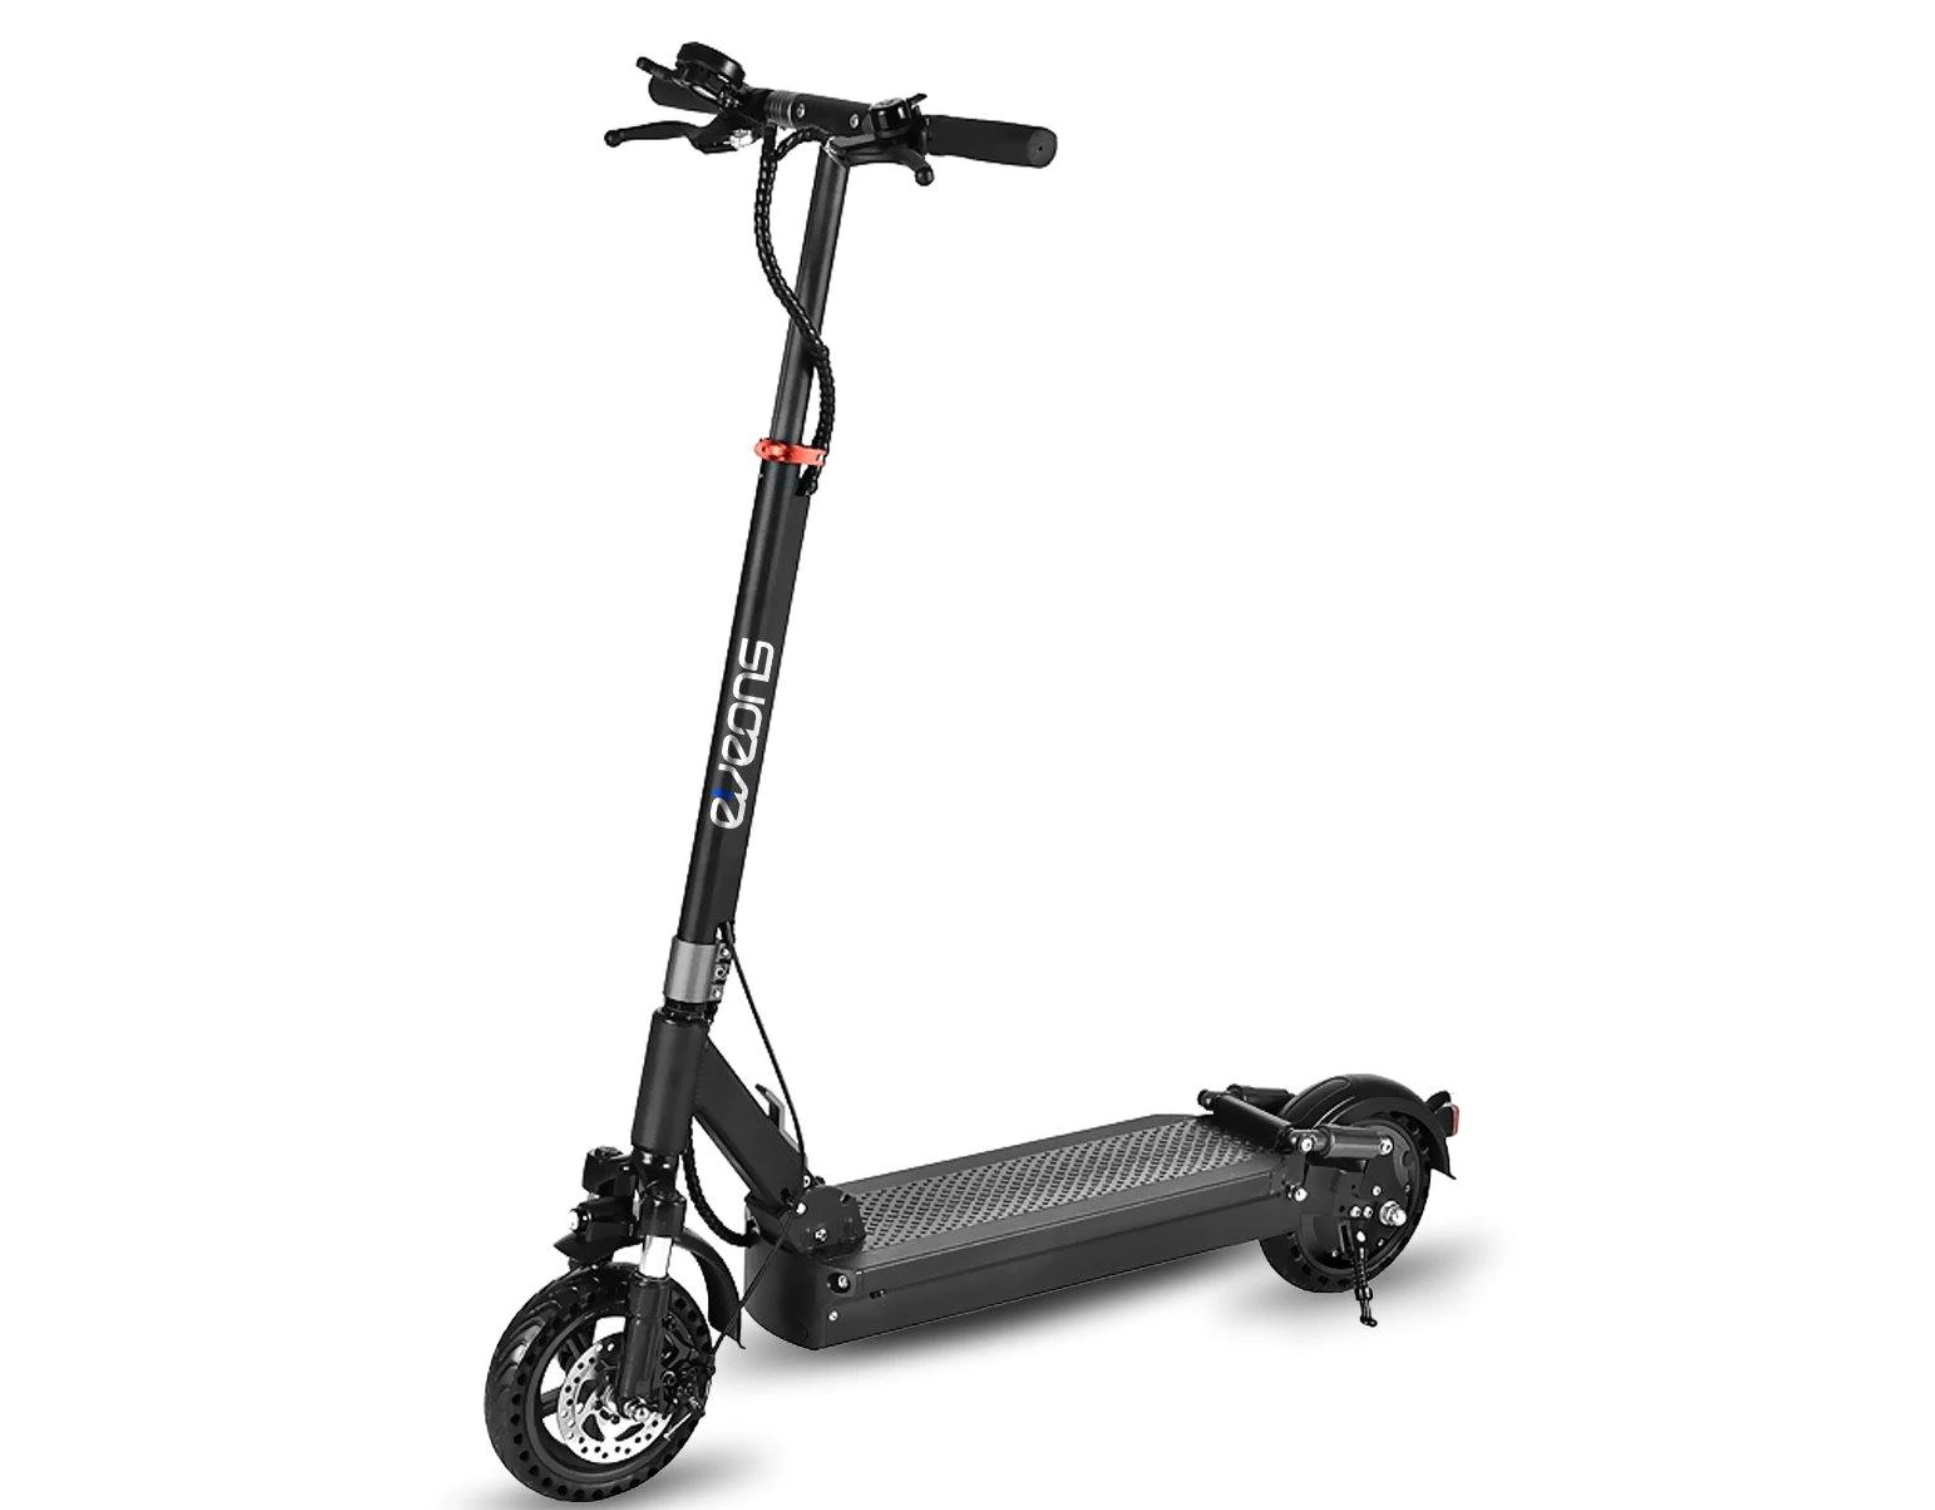 Eveons G Pro Black Electric Scooter 500W in the UAE – 2 YEARS WARRANTY